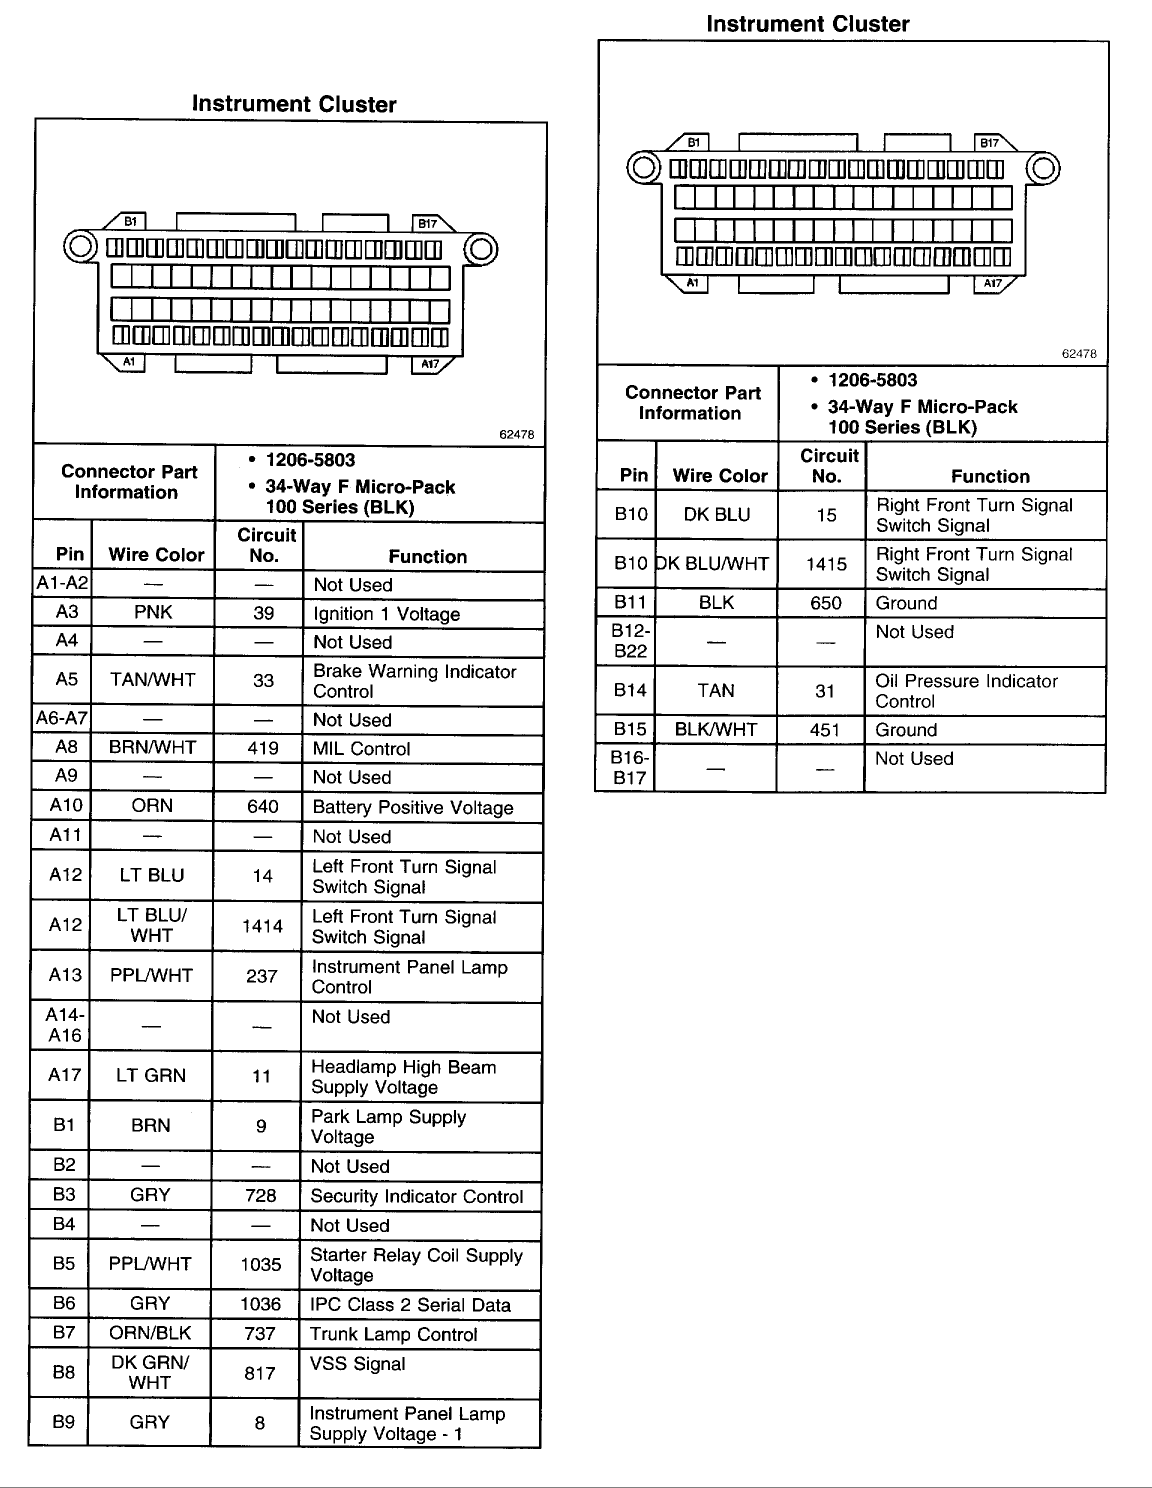 Gm Instrument Cluster Wiring Diagram from ls1tech.com